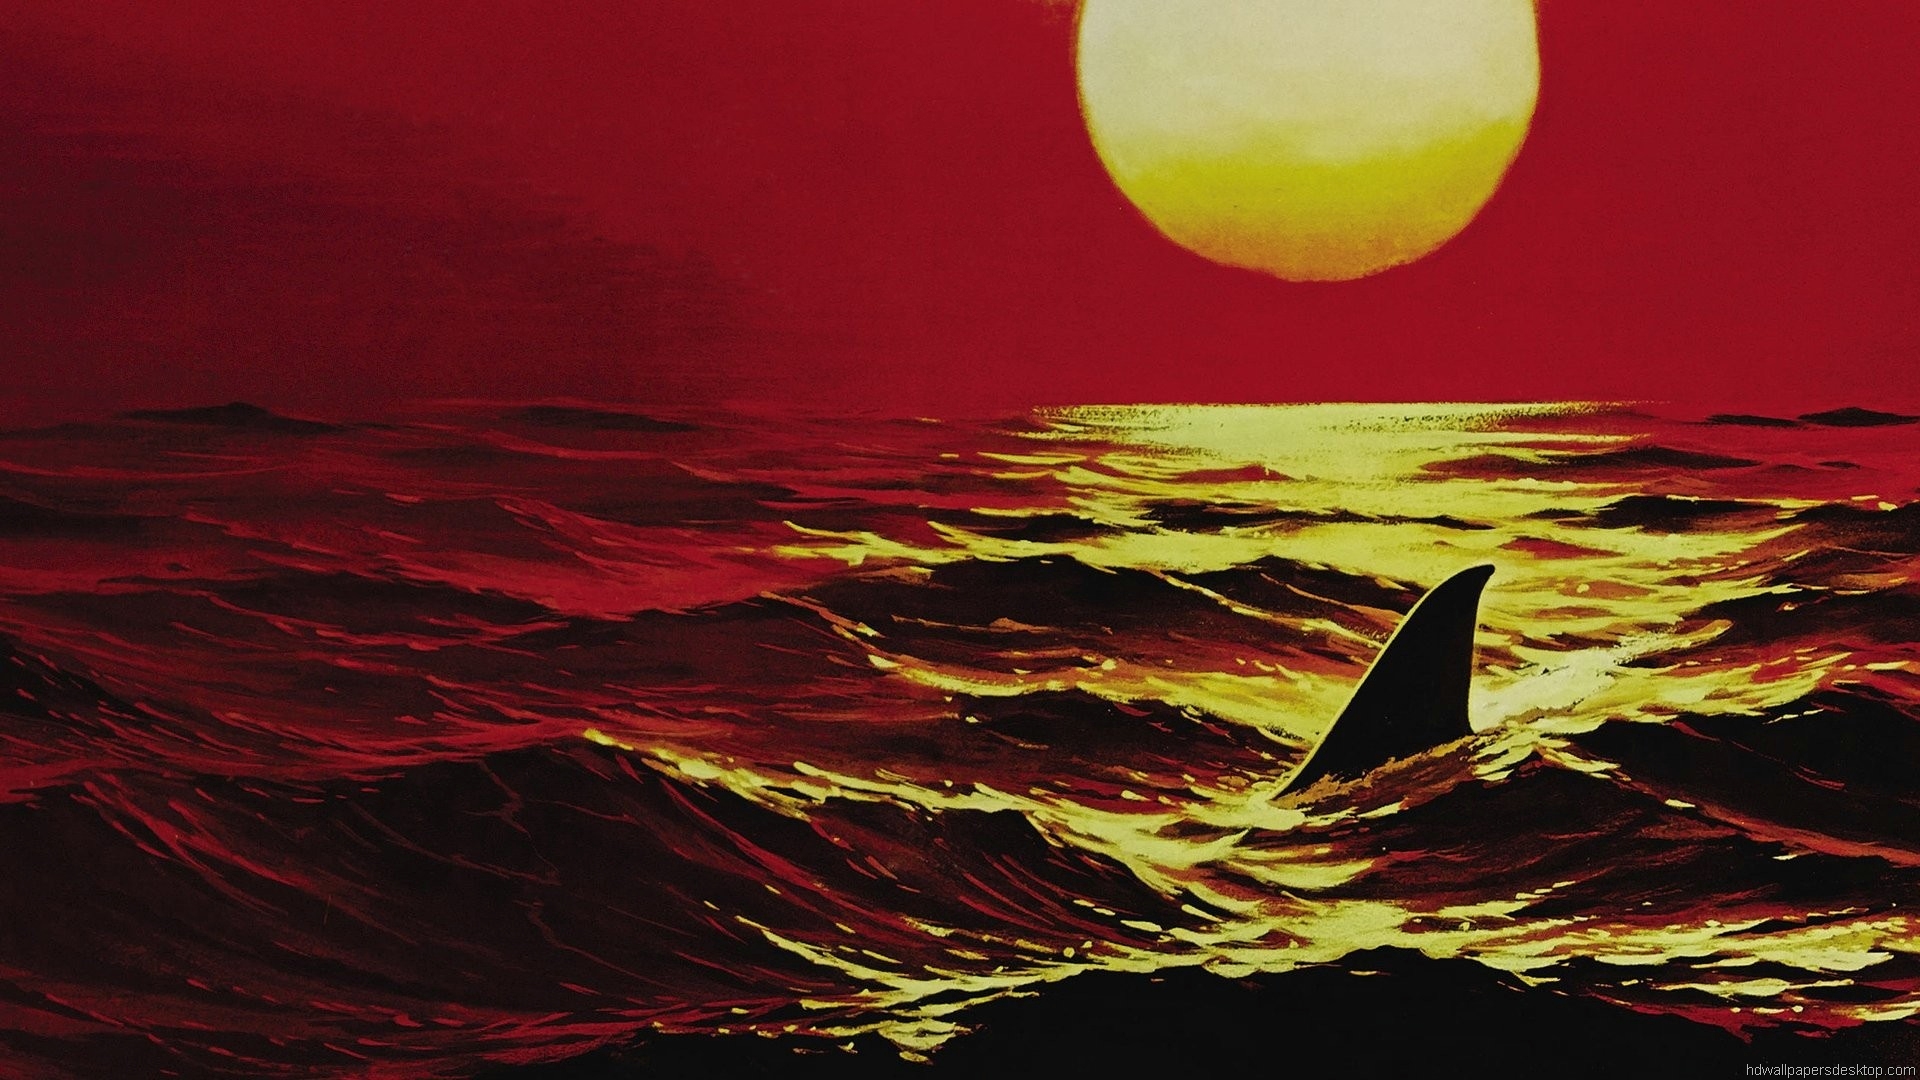 Jaws Wallpaper Hd Movie Full 1080p 1920x1080 Pictures 1920x1080